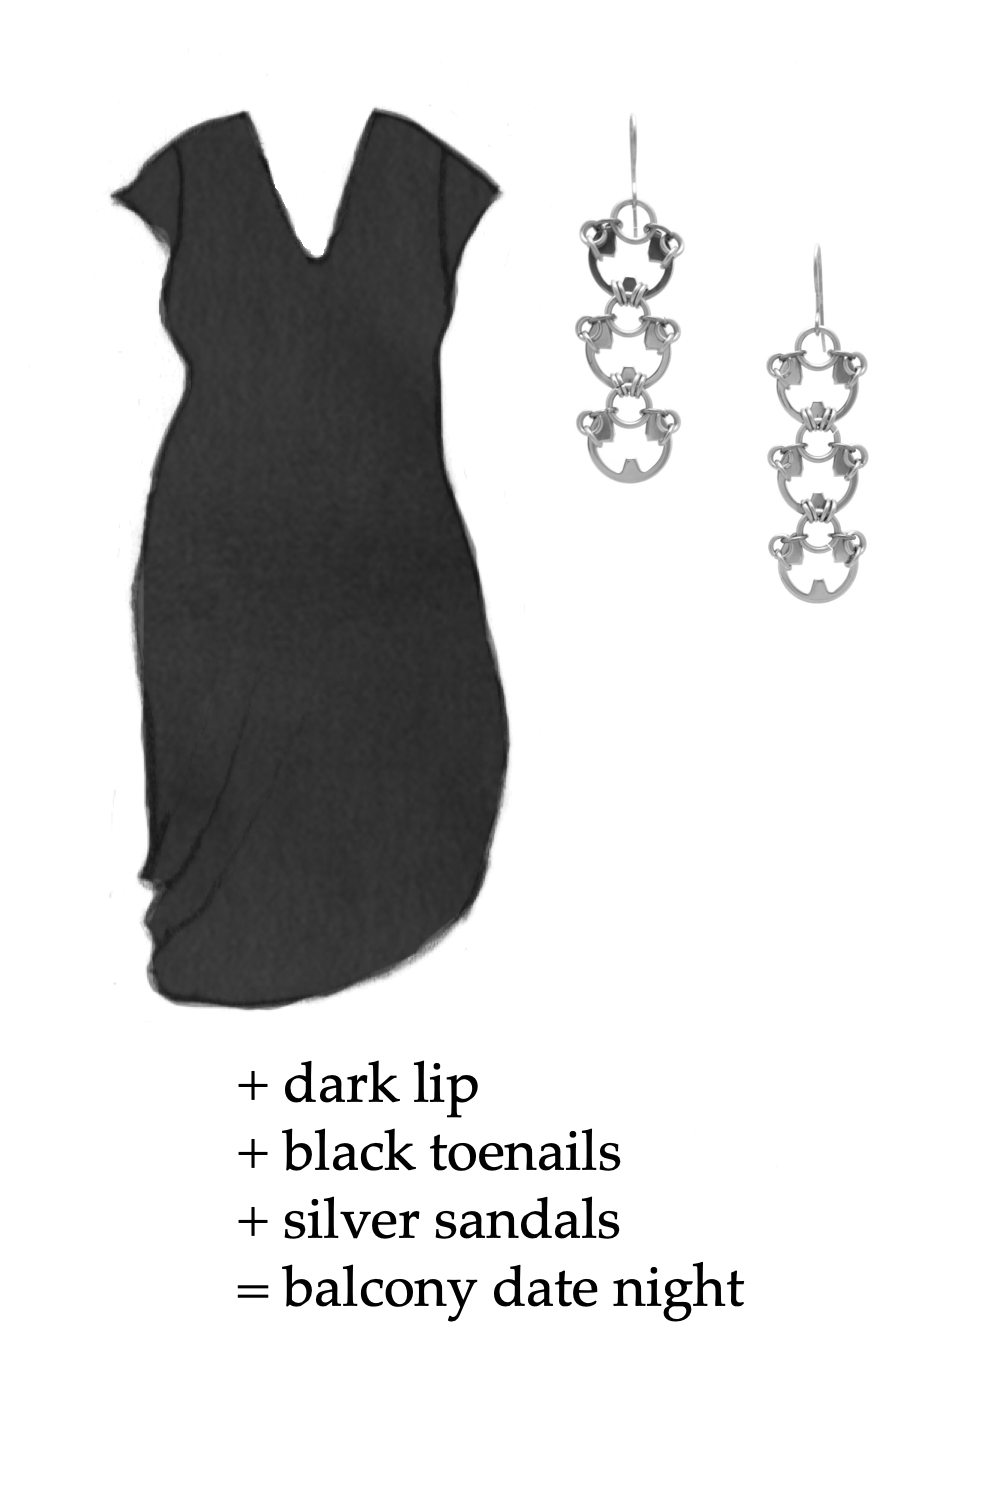 Outfit idea featuring a style sketch of the Geneva V-Neck Dress by Universal Standard in black and the Lotus Earrings by Wraptillion. Text on image reads: + dark lip + black toenails + silver sandals = balcony date night.